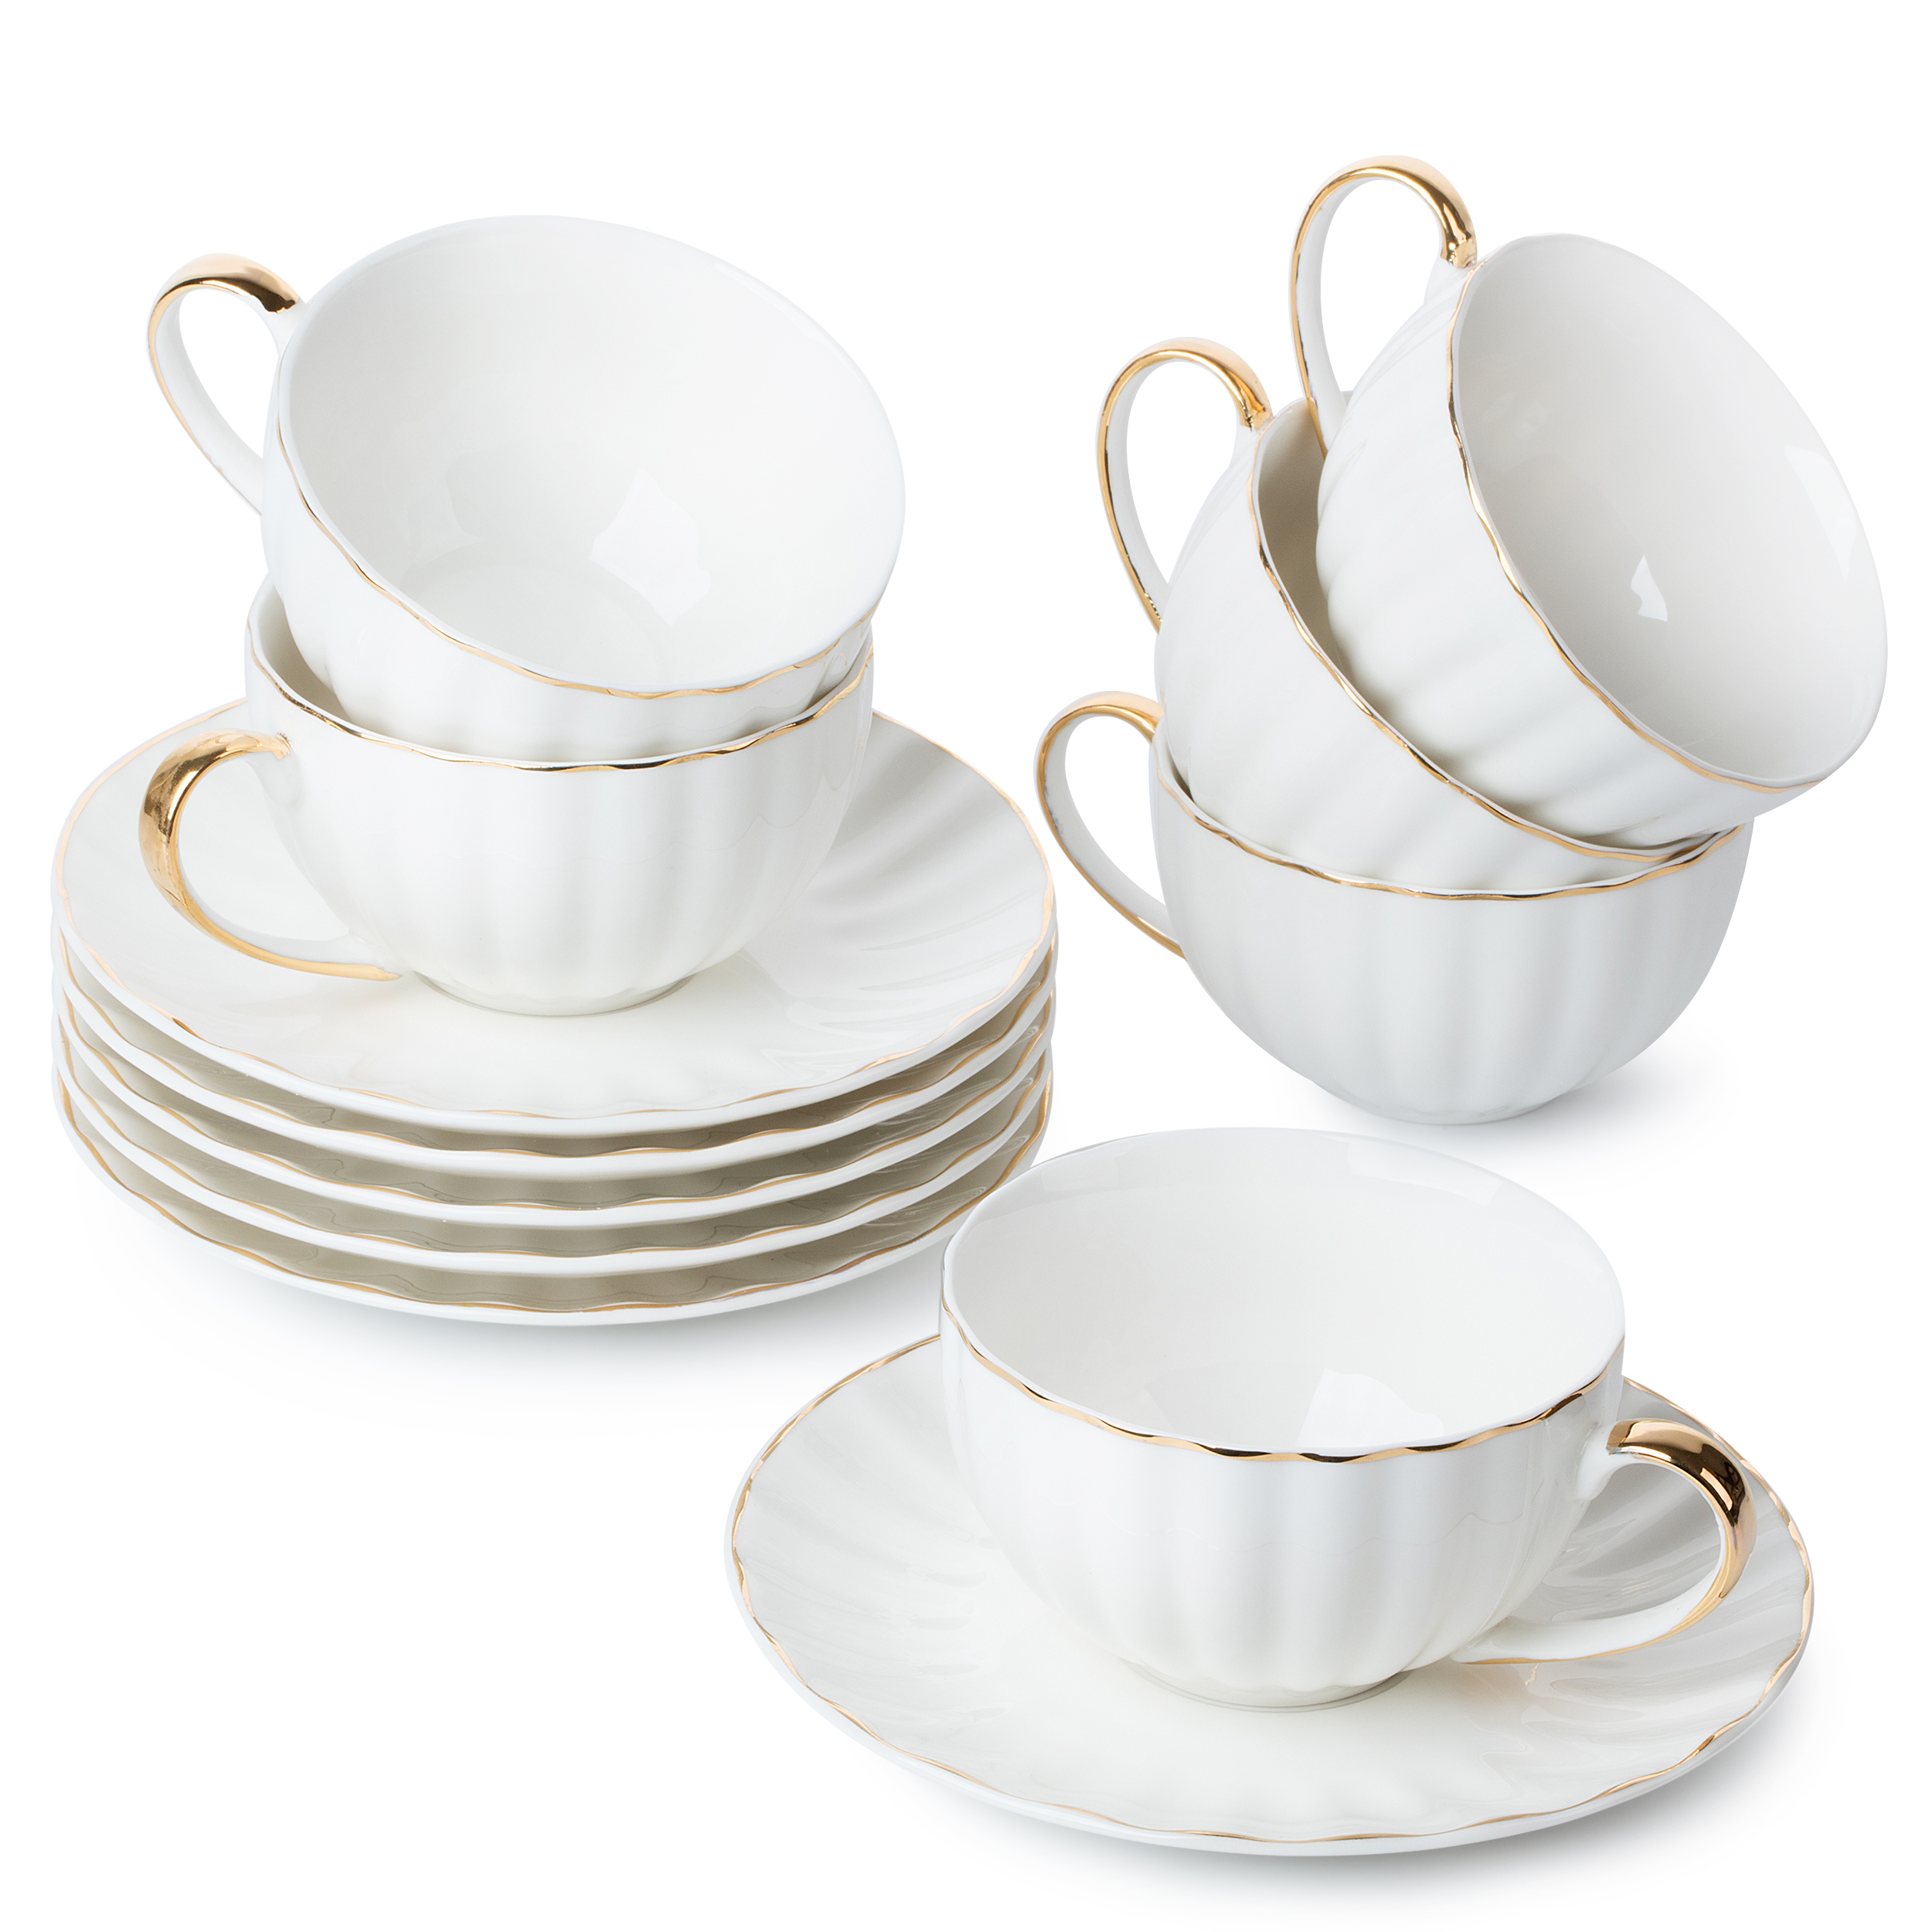 Set of 4 Colorful Porcelain Tea-Coffee Cups and Saucers Set - 8 oz, Gold